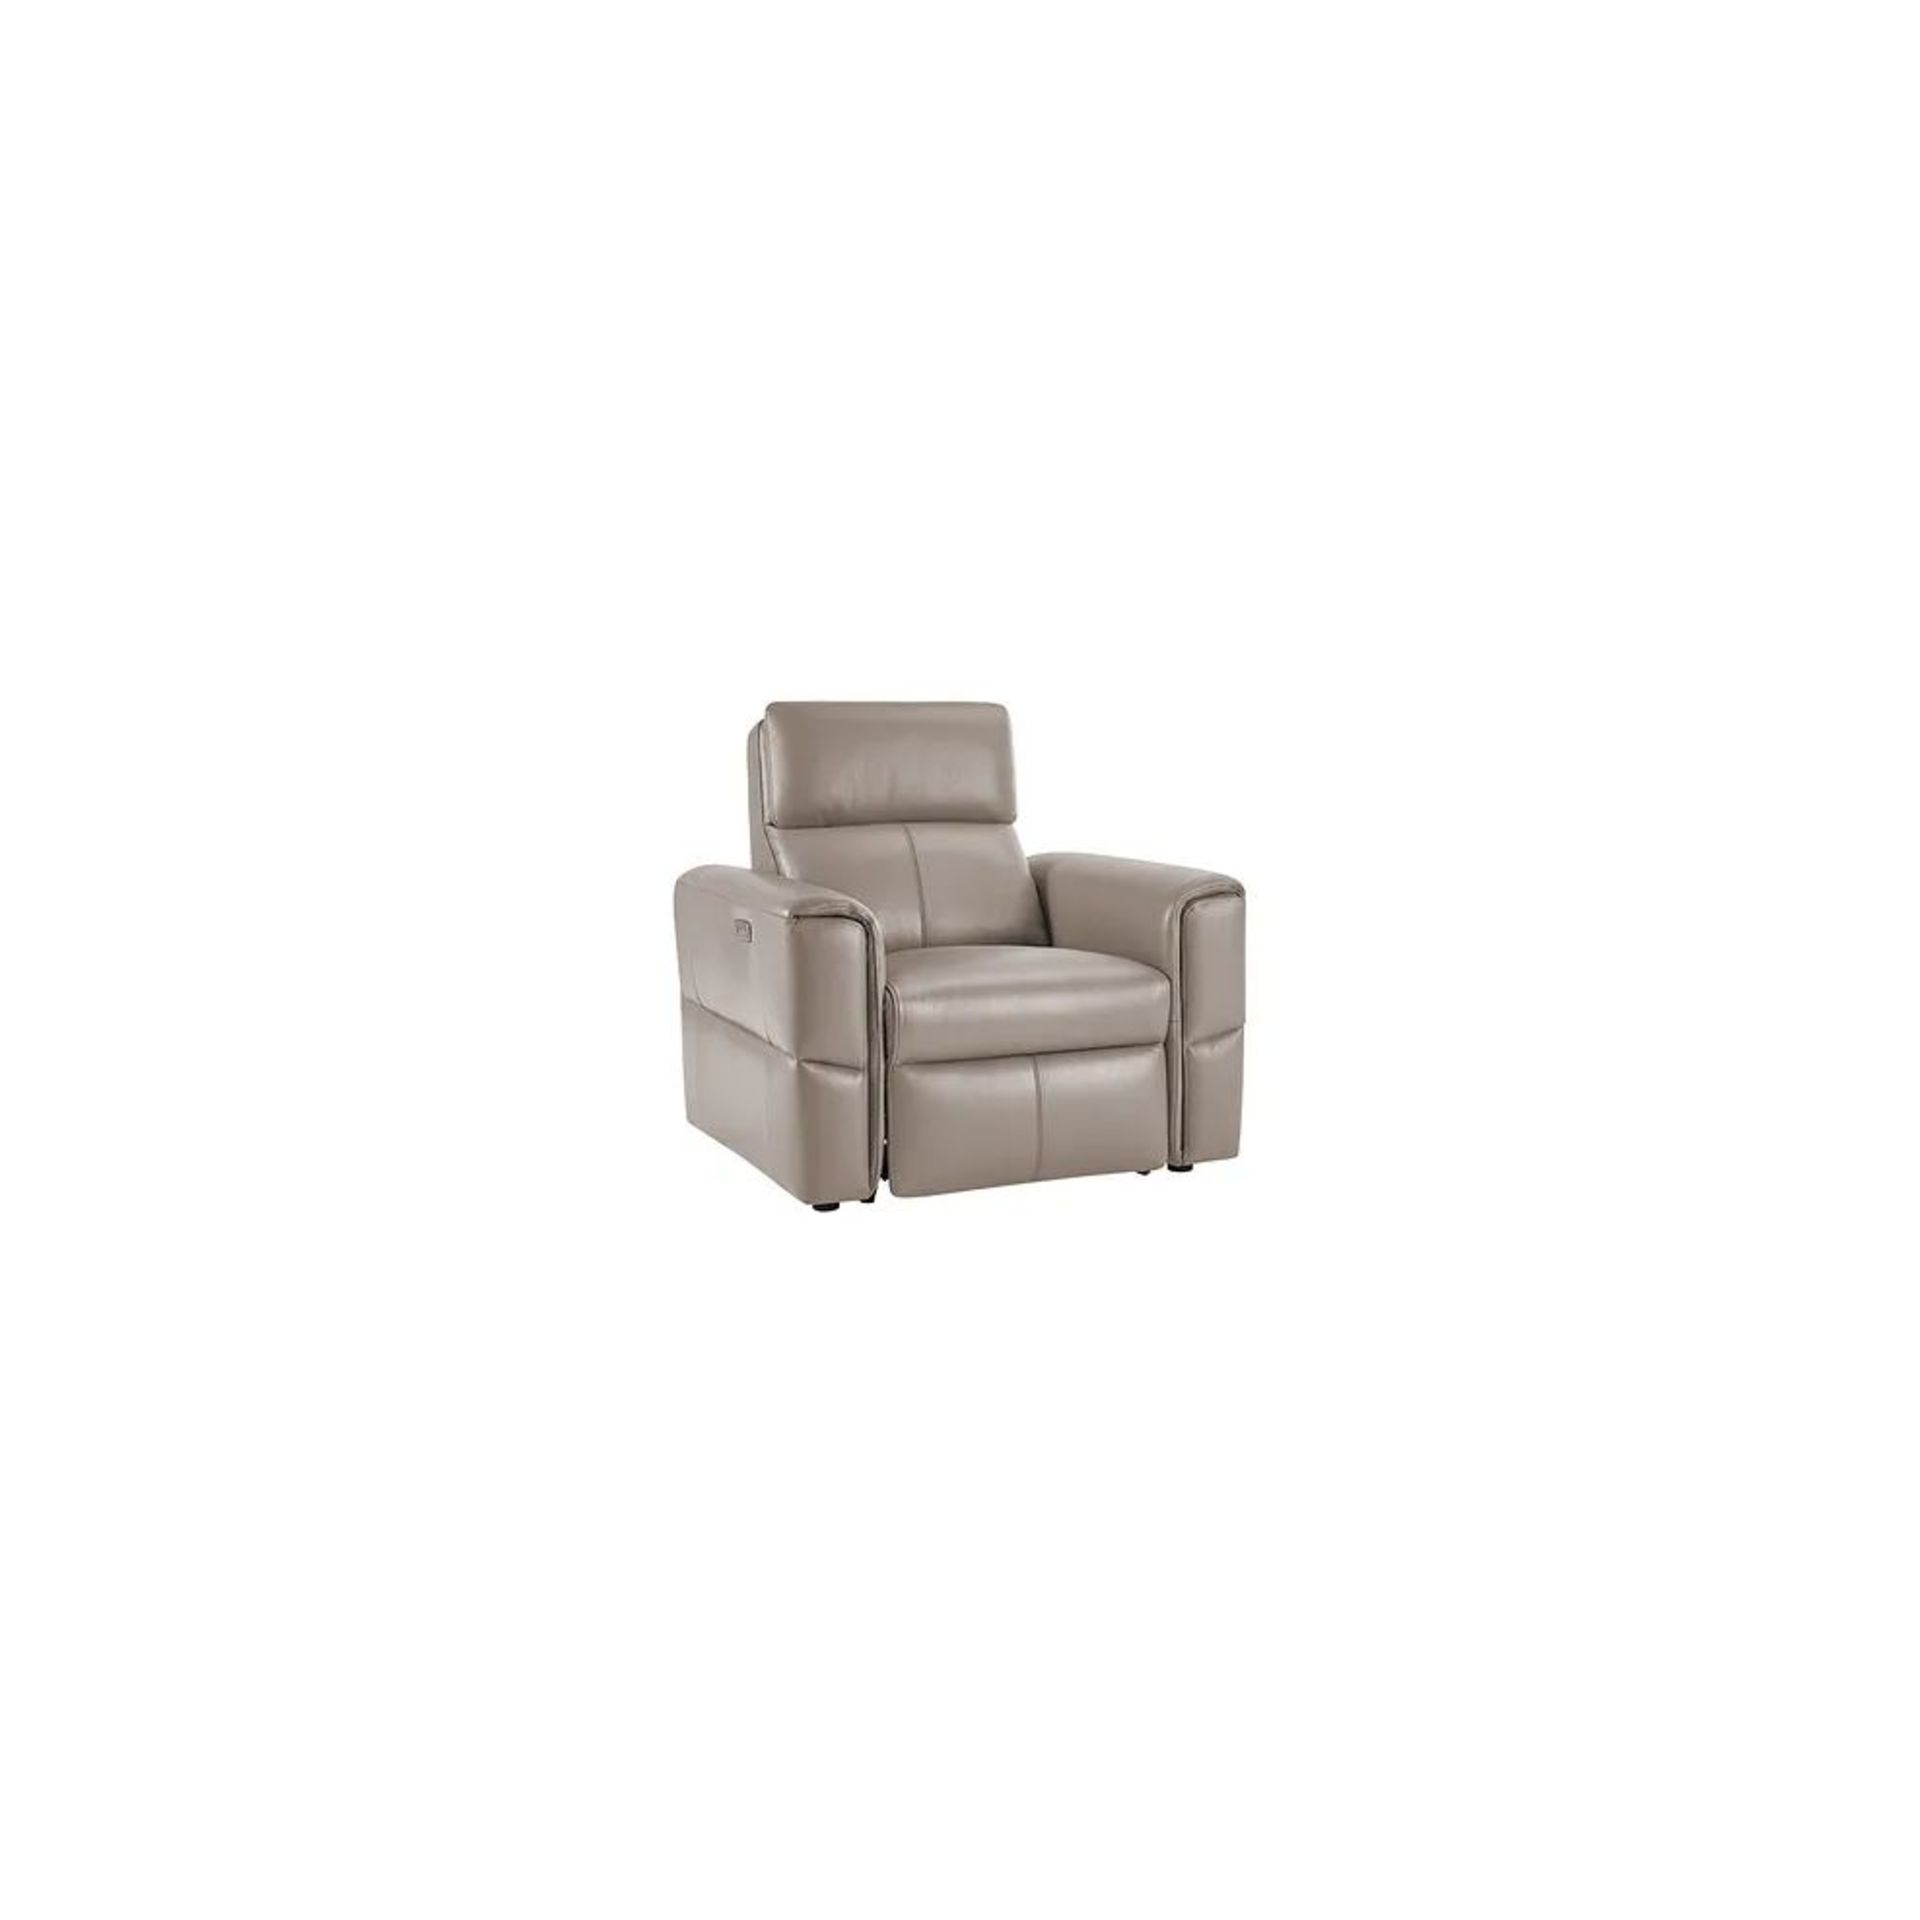 BRAND NEW SAMSON Electric Recliner Armchair - STONE LEATHER. RRP £1249. Showcasing neat, modern